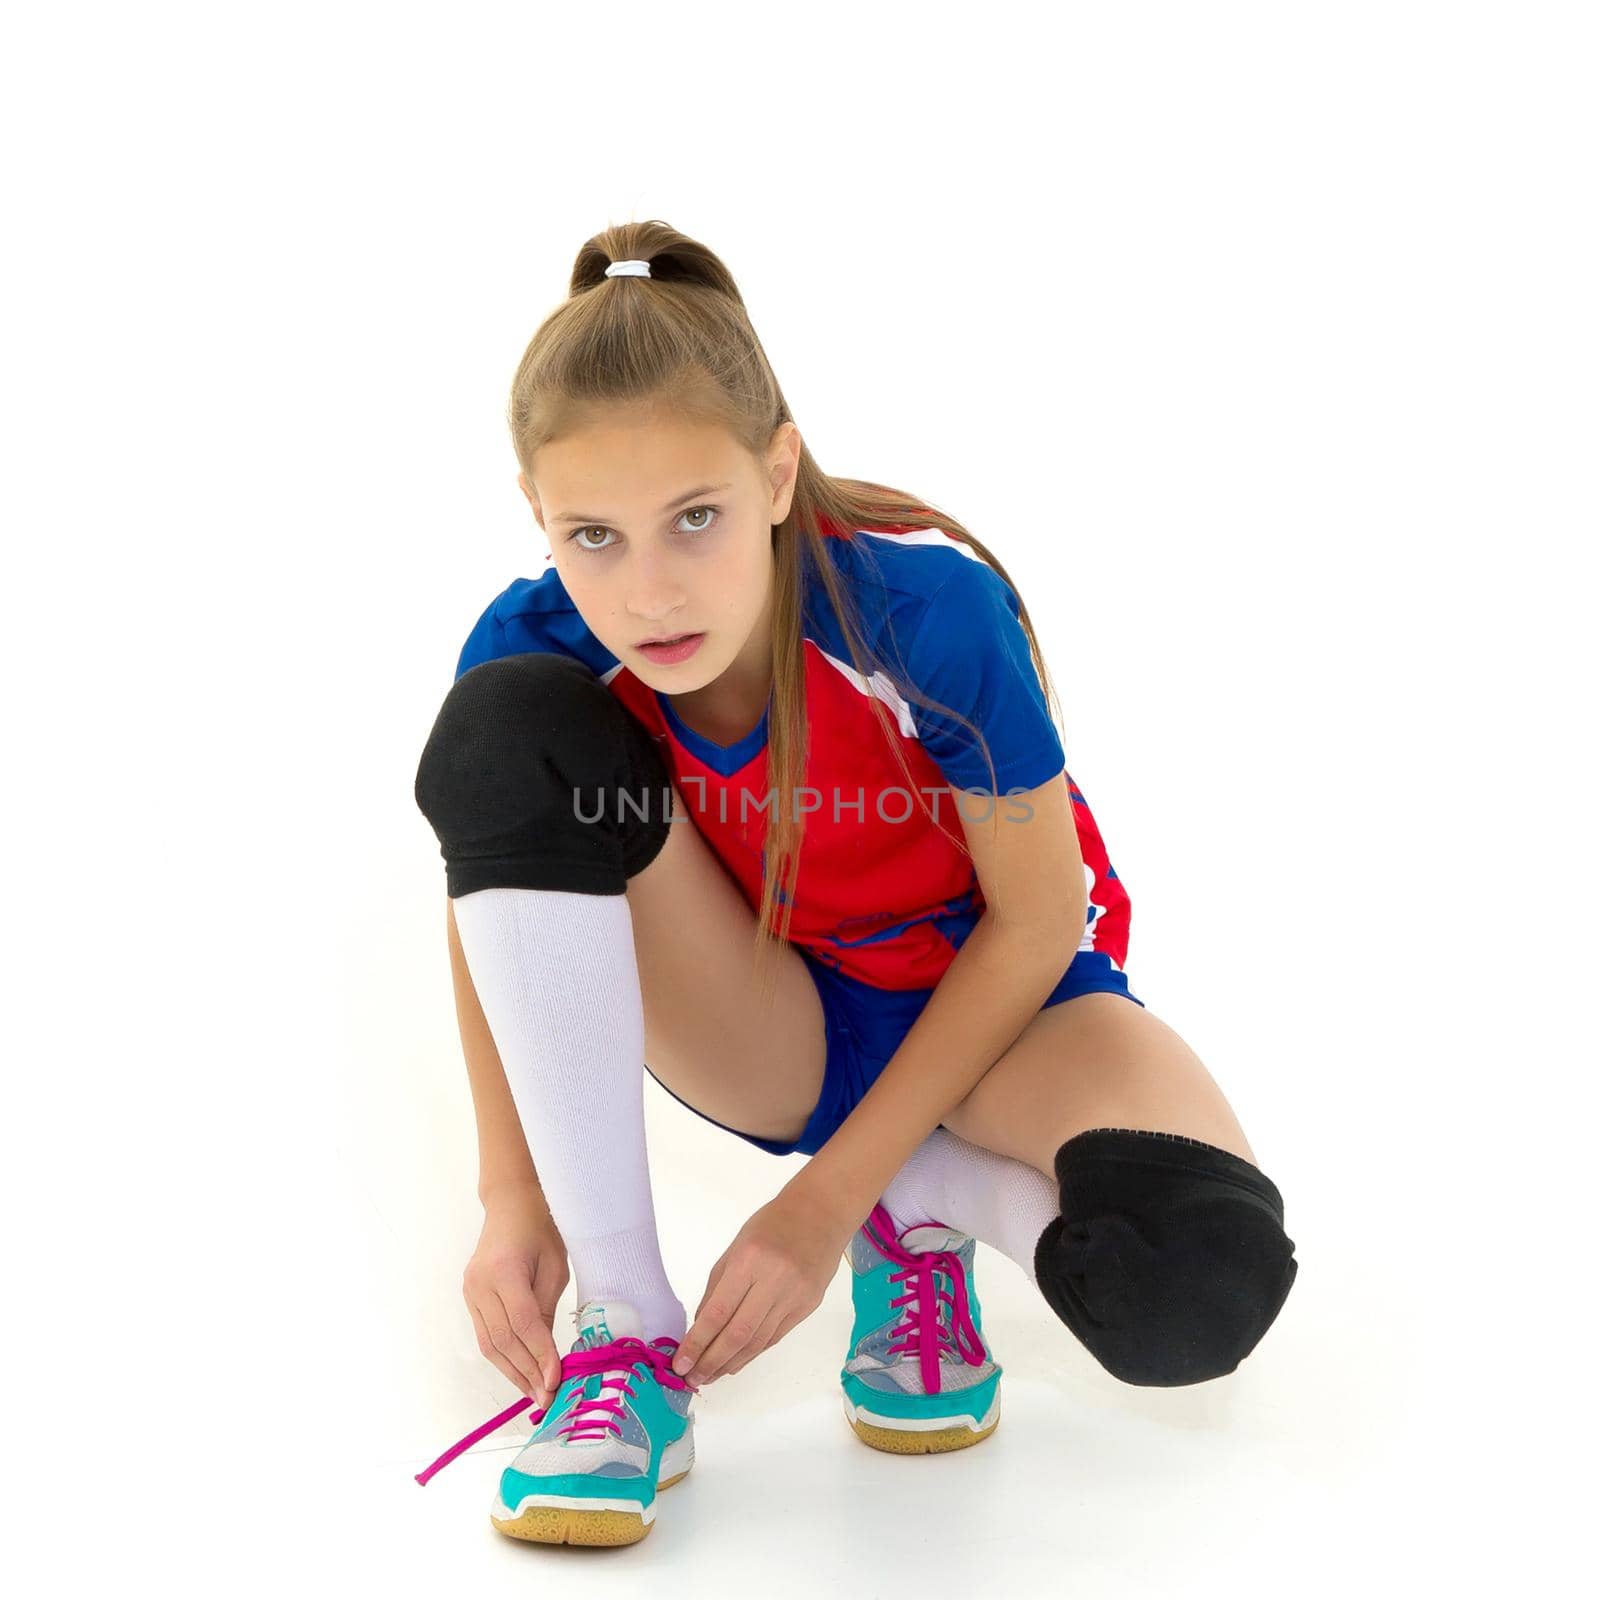 Girl crouching down and tying her shoelaces. Pretty teenage girl volleyball player in sports uniform, knee pads and sneakers posing on isolated white background looking at camera